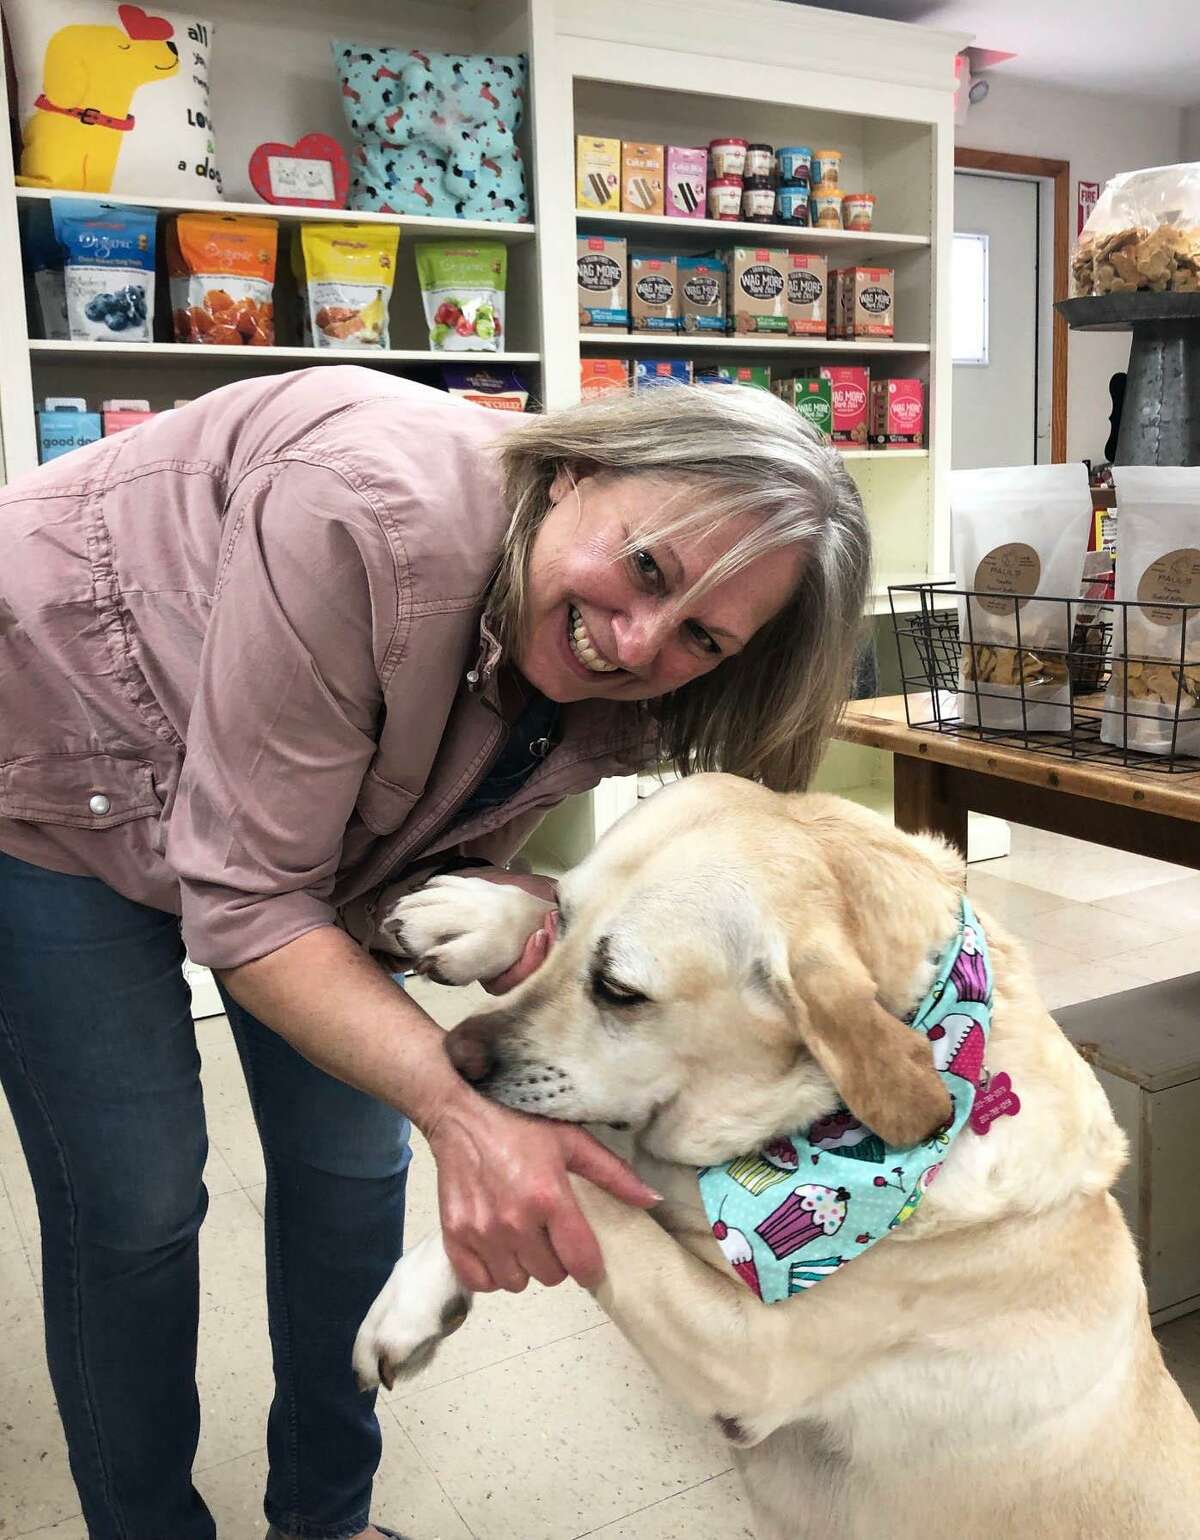 Spectrum/Debbie Bauman, owner of The Barkery Boo’tique in New Milford has moved the business from Bank Street to 92 Park Lane Road (Route 202). Bauman is shown above with her dog, Daisy, an 8-year-old Yellow Lab, who is the store’s “official greeter and taste tester.” May 2019